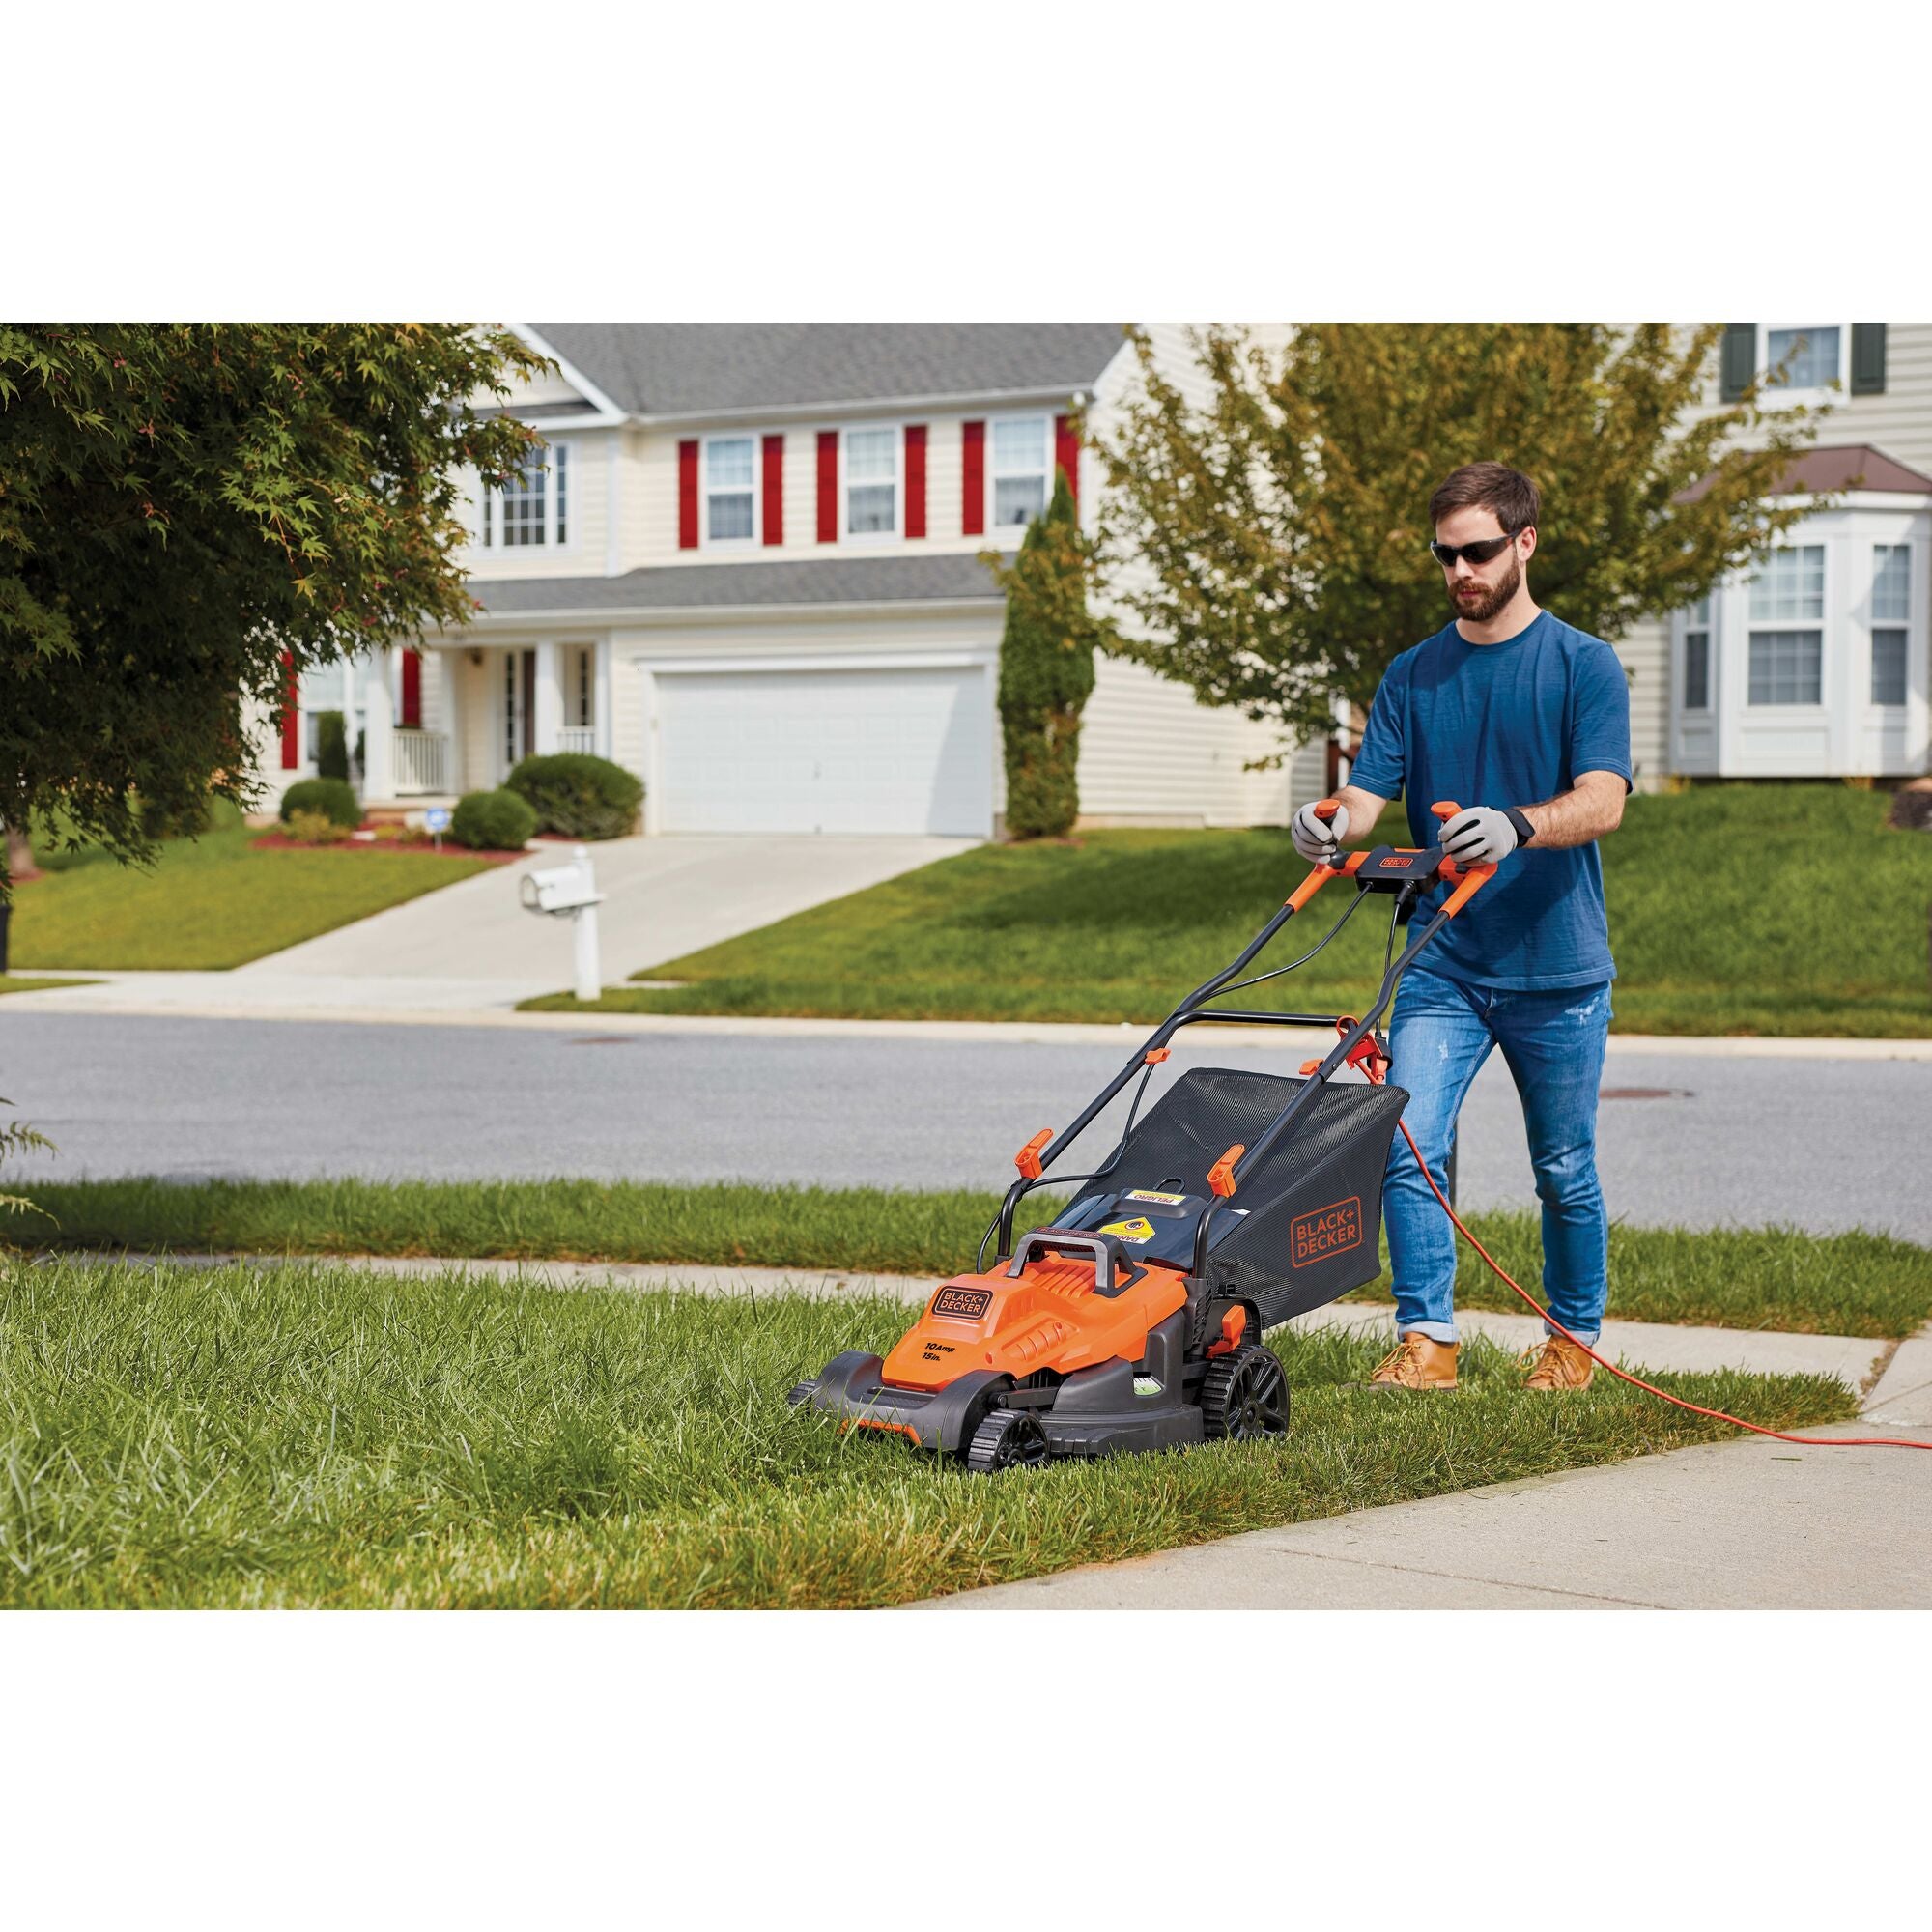 Electric Lawn Mower With Bike Handle, 15-Inch, 10-Amp, Corded